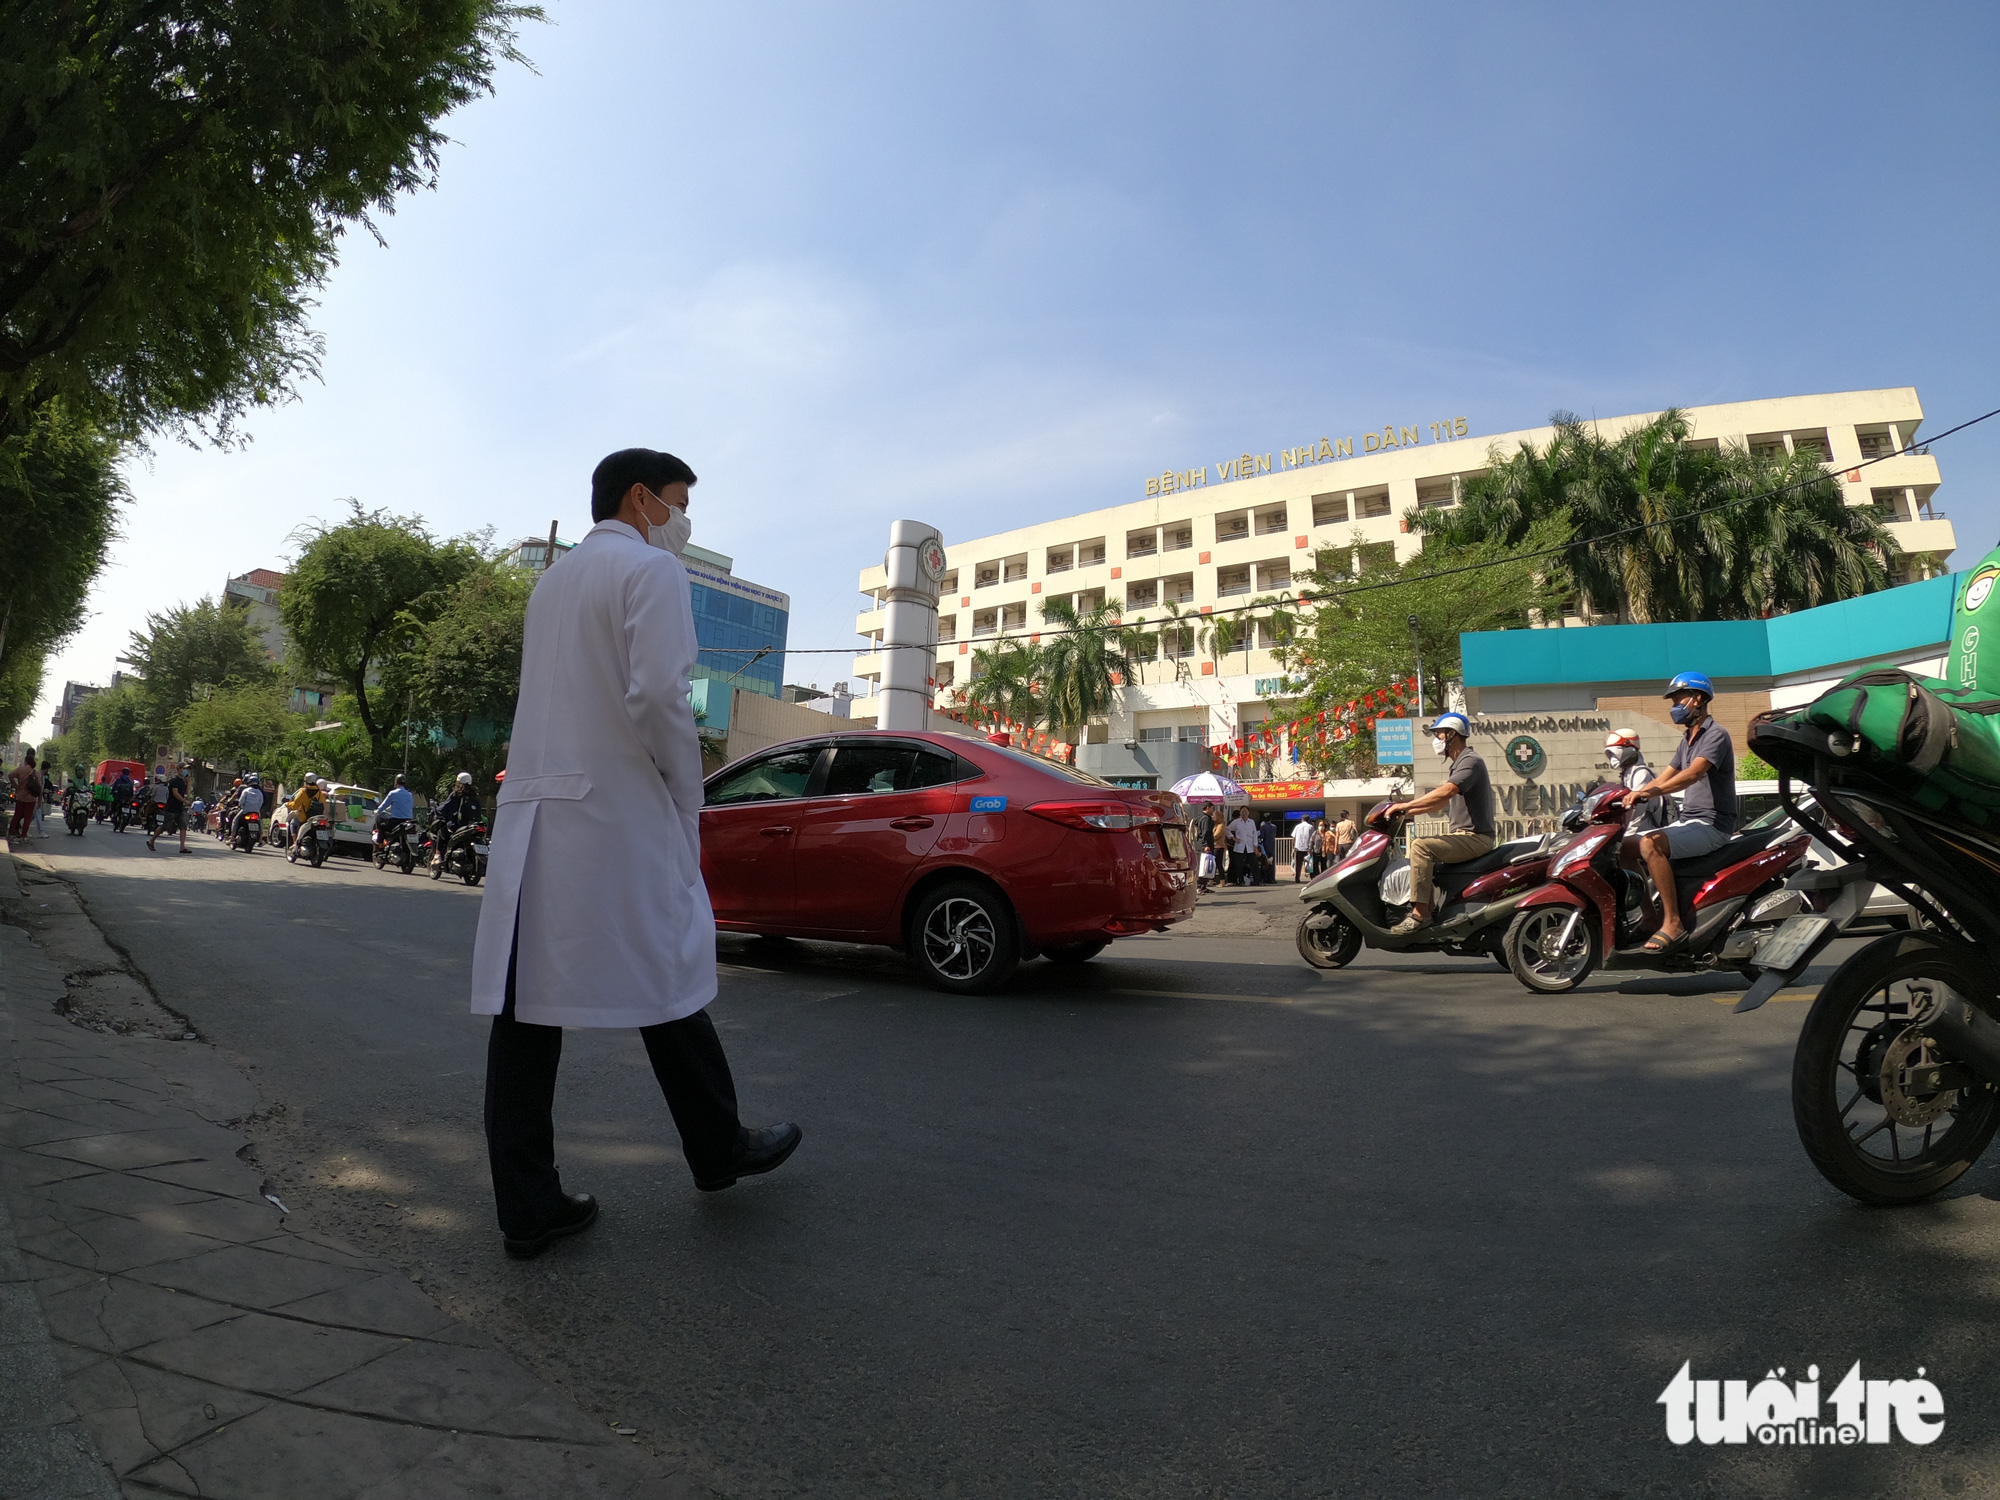 Vehicles travel past the 115 People’s Hospital on Su Van Hanh Street in District 10, Ho Chi Minh City. Photo: Hoang Loc / Tuoi Tre